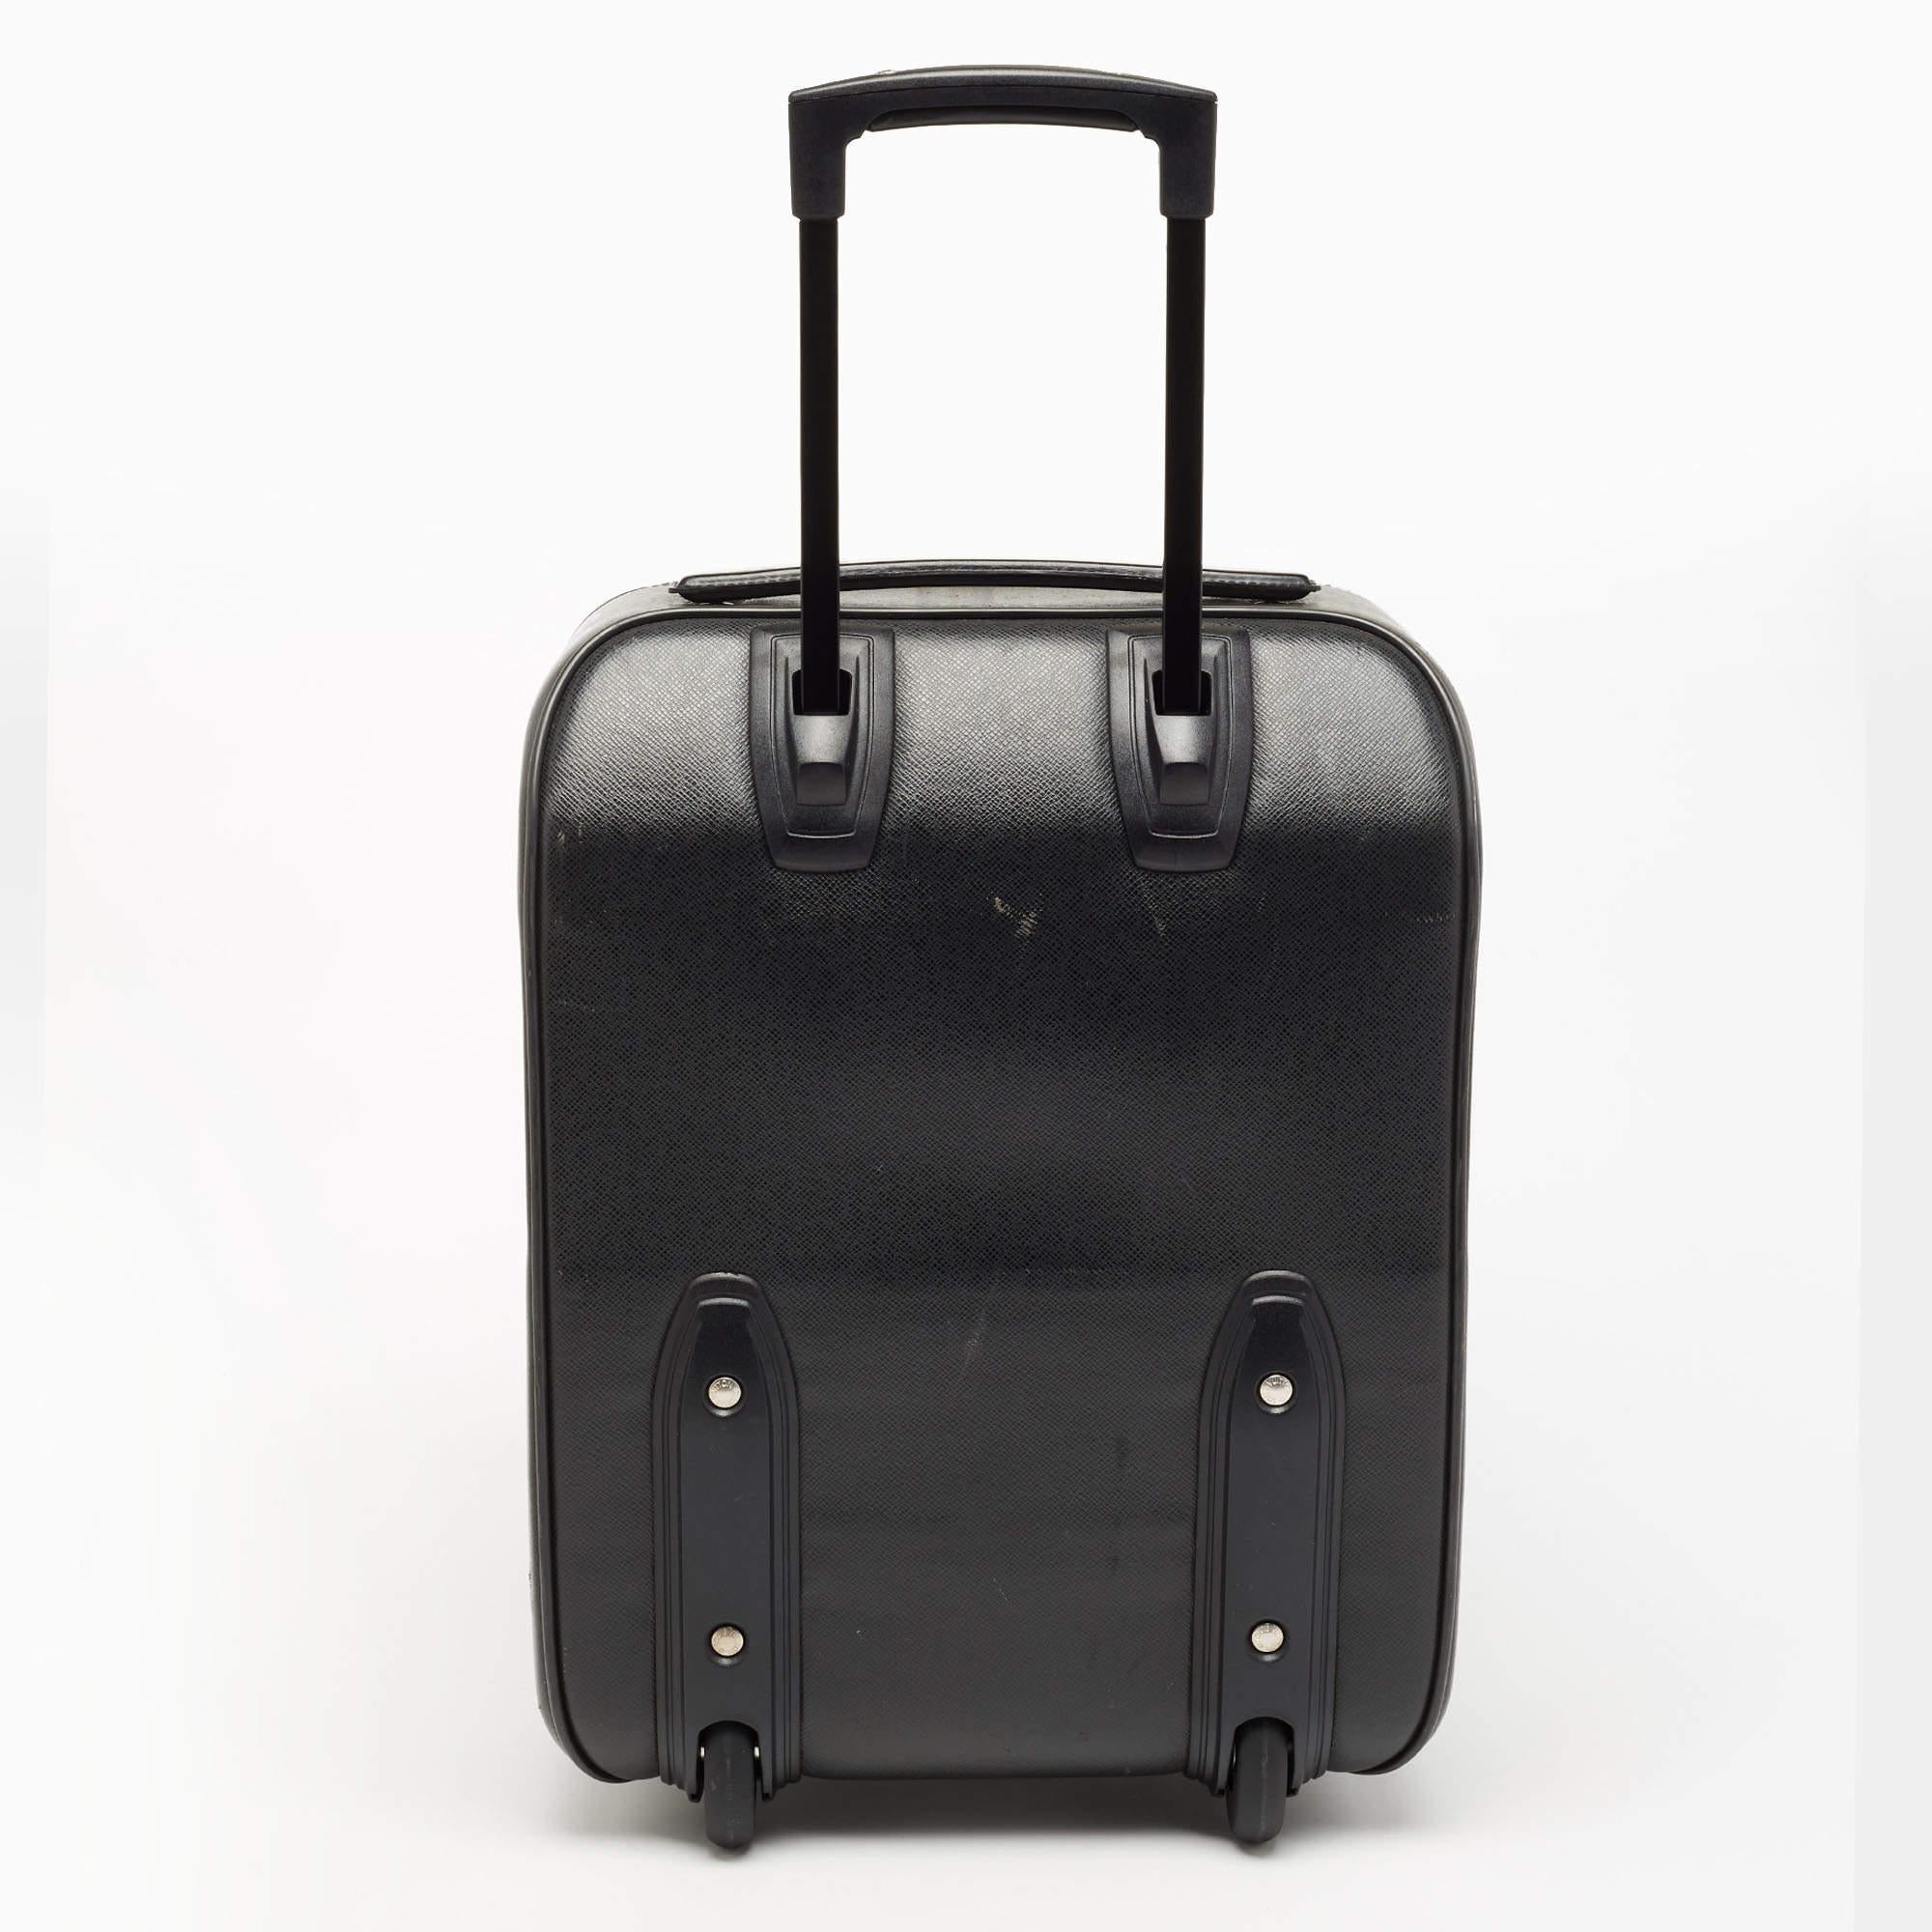 This Pegase 45 Business luggage from Louis Vuitton is super sturdy, practical, and stylish for long vacations. Crafted from Ardoise Taiga leather, this luggage bag displays silver-tone fittings, a trolley handle, and a neat nylon-lined interior. For